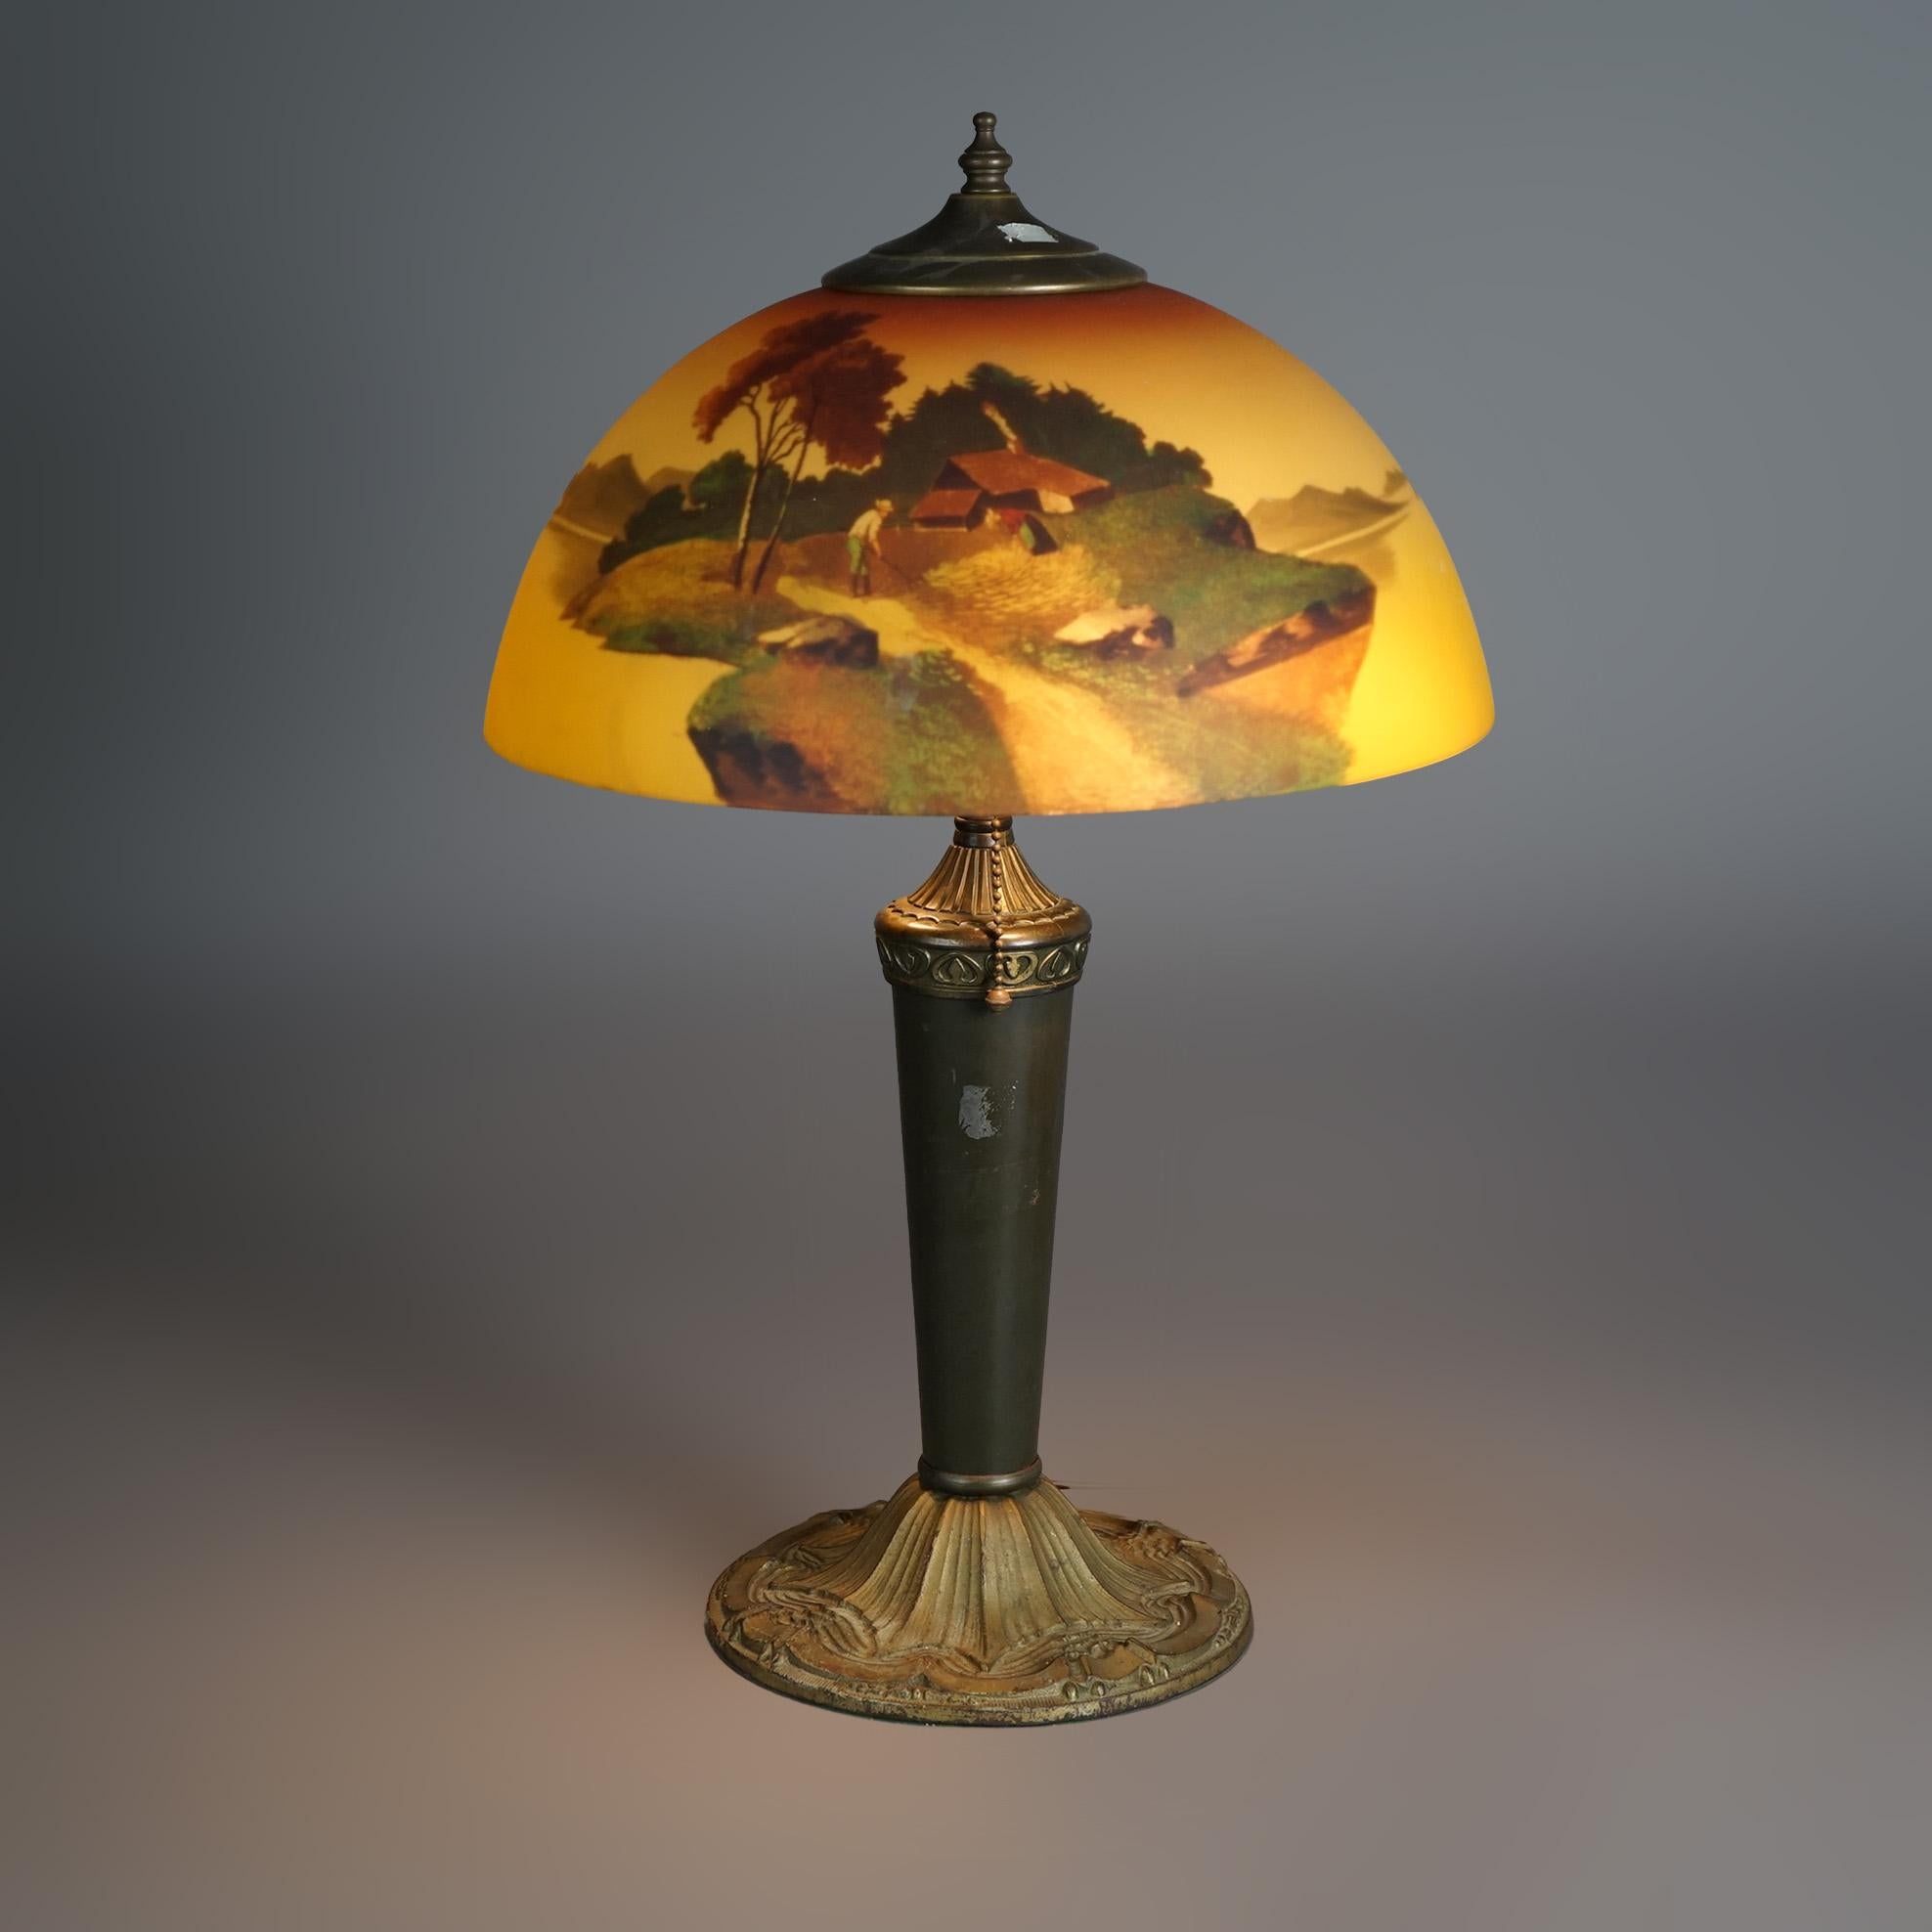 An antique Phoenix table lamp offers reverse painted dome form glass shade having hand painted landscape scene over double socket cast urn form base with bronzed finish, c1920

Measures - 21.5